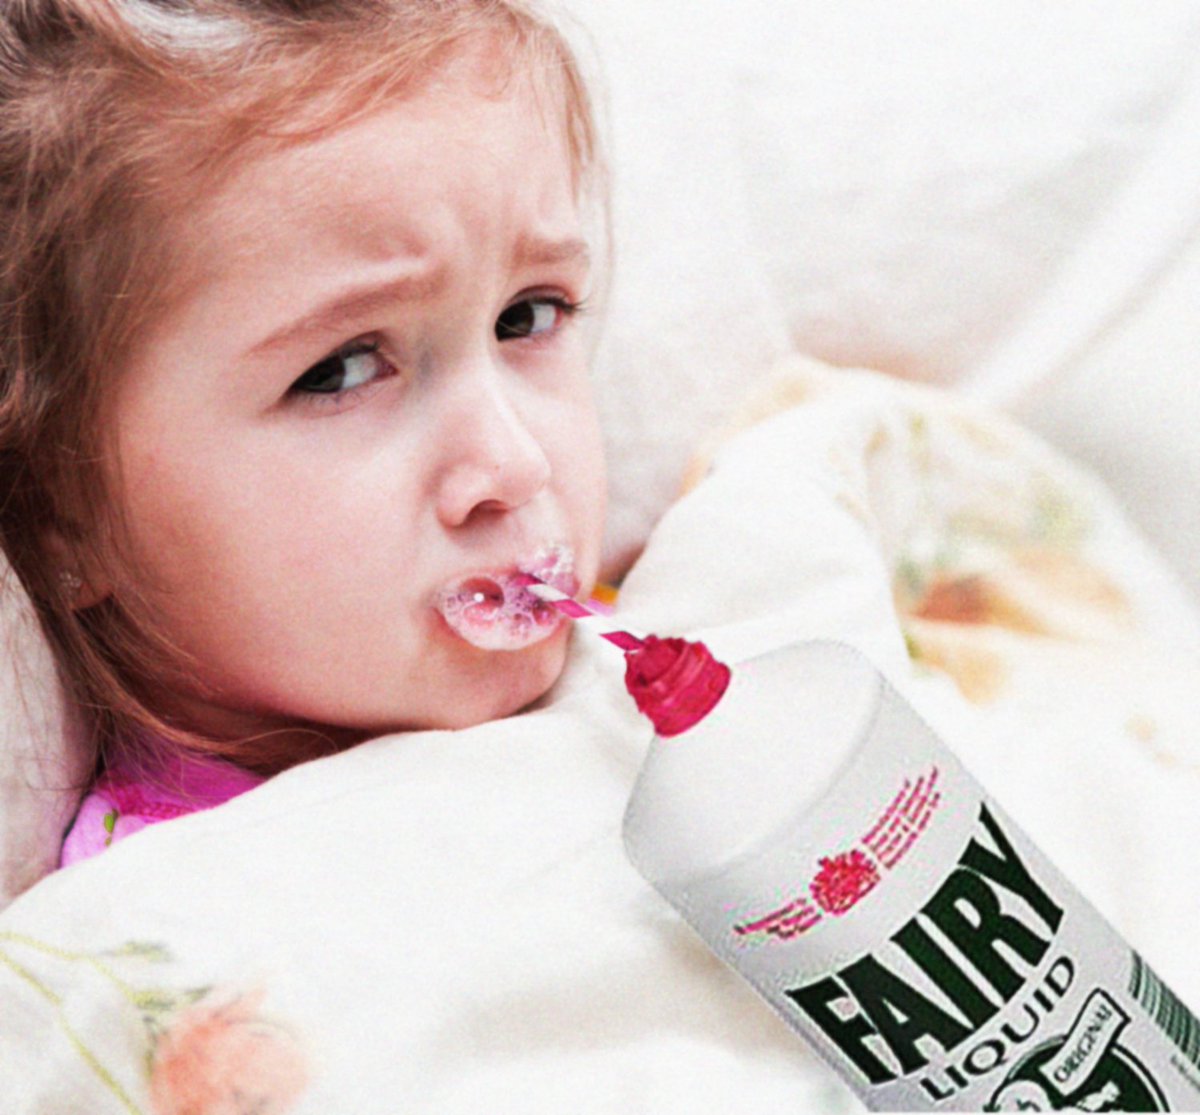 Retweet if you remember being poorly in bed and your mum would force you to drink an entire bottle of Fairy Liquid to wash away the germs! #Poorly #MumsMedicine #FairyLiquid